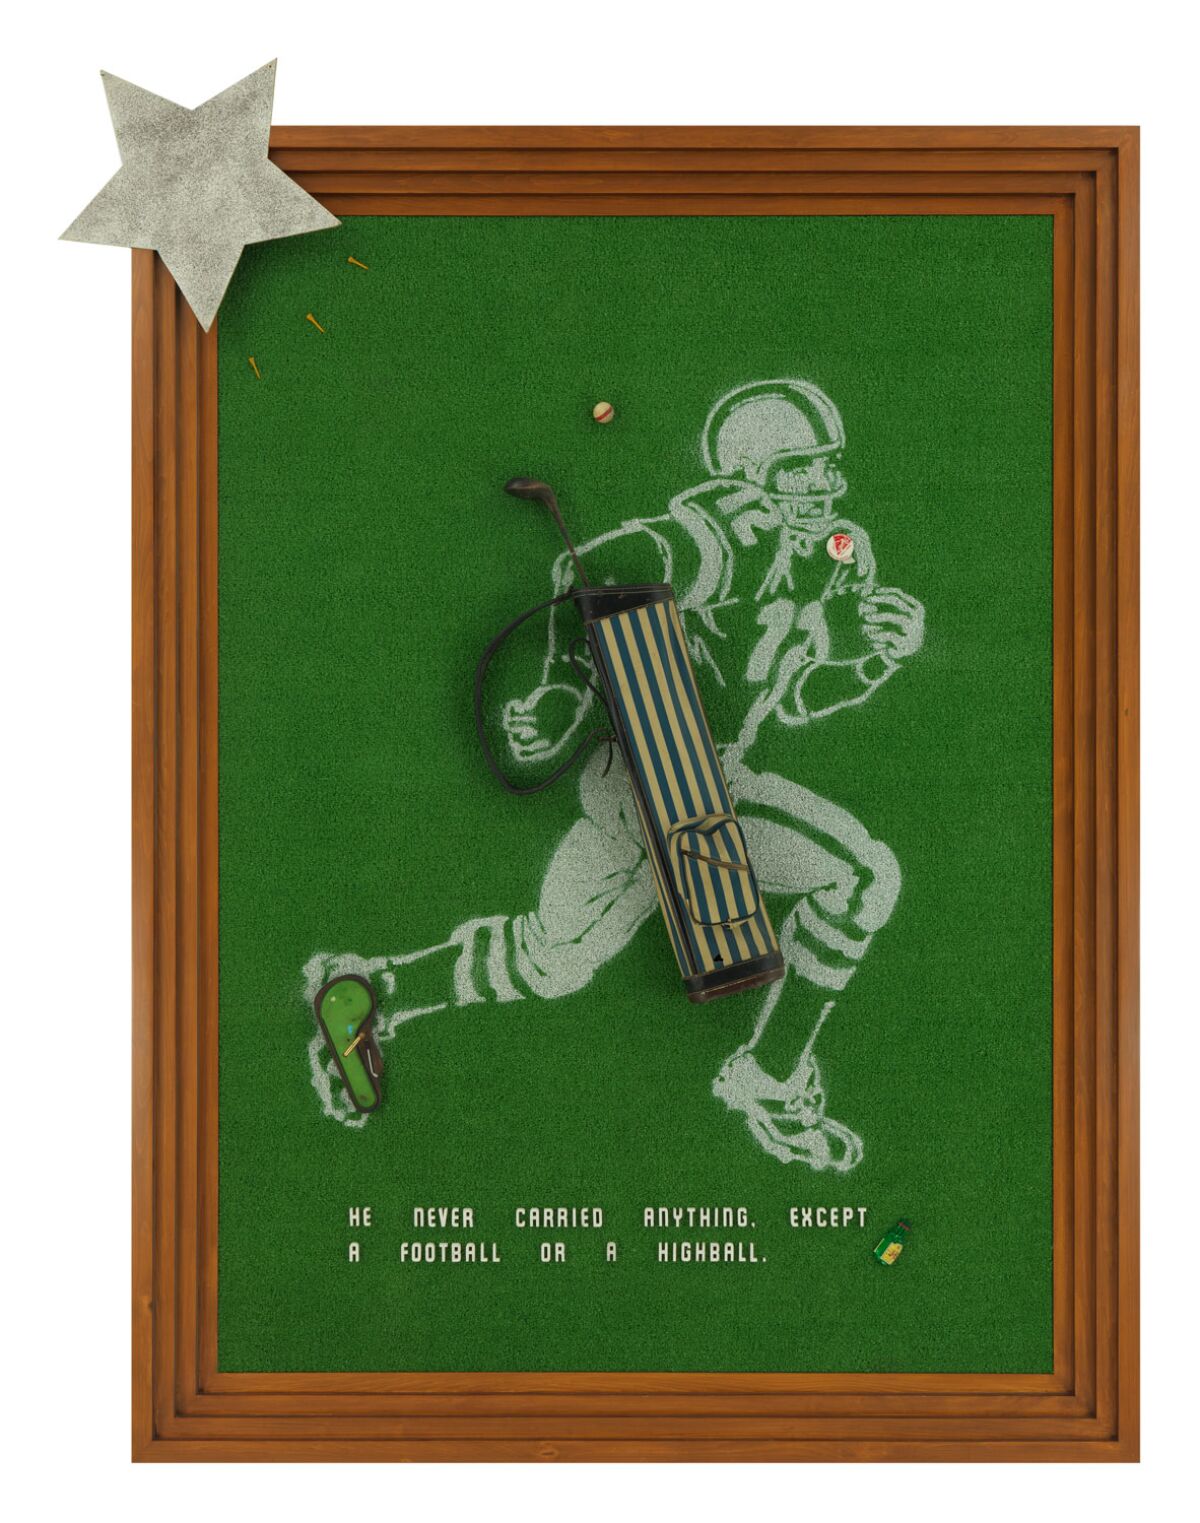 "All-American" by Alexis Smith (c. 1994. Acrylic, mixed media on Astroturf; metal, plastic and wood trophies)